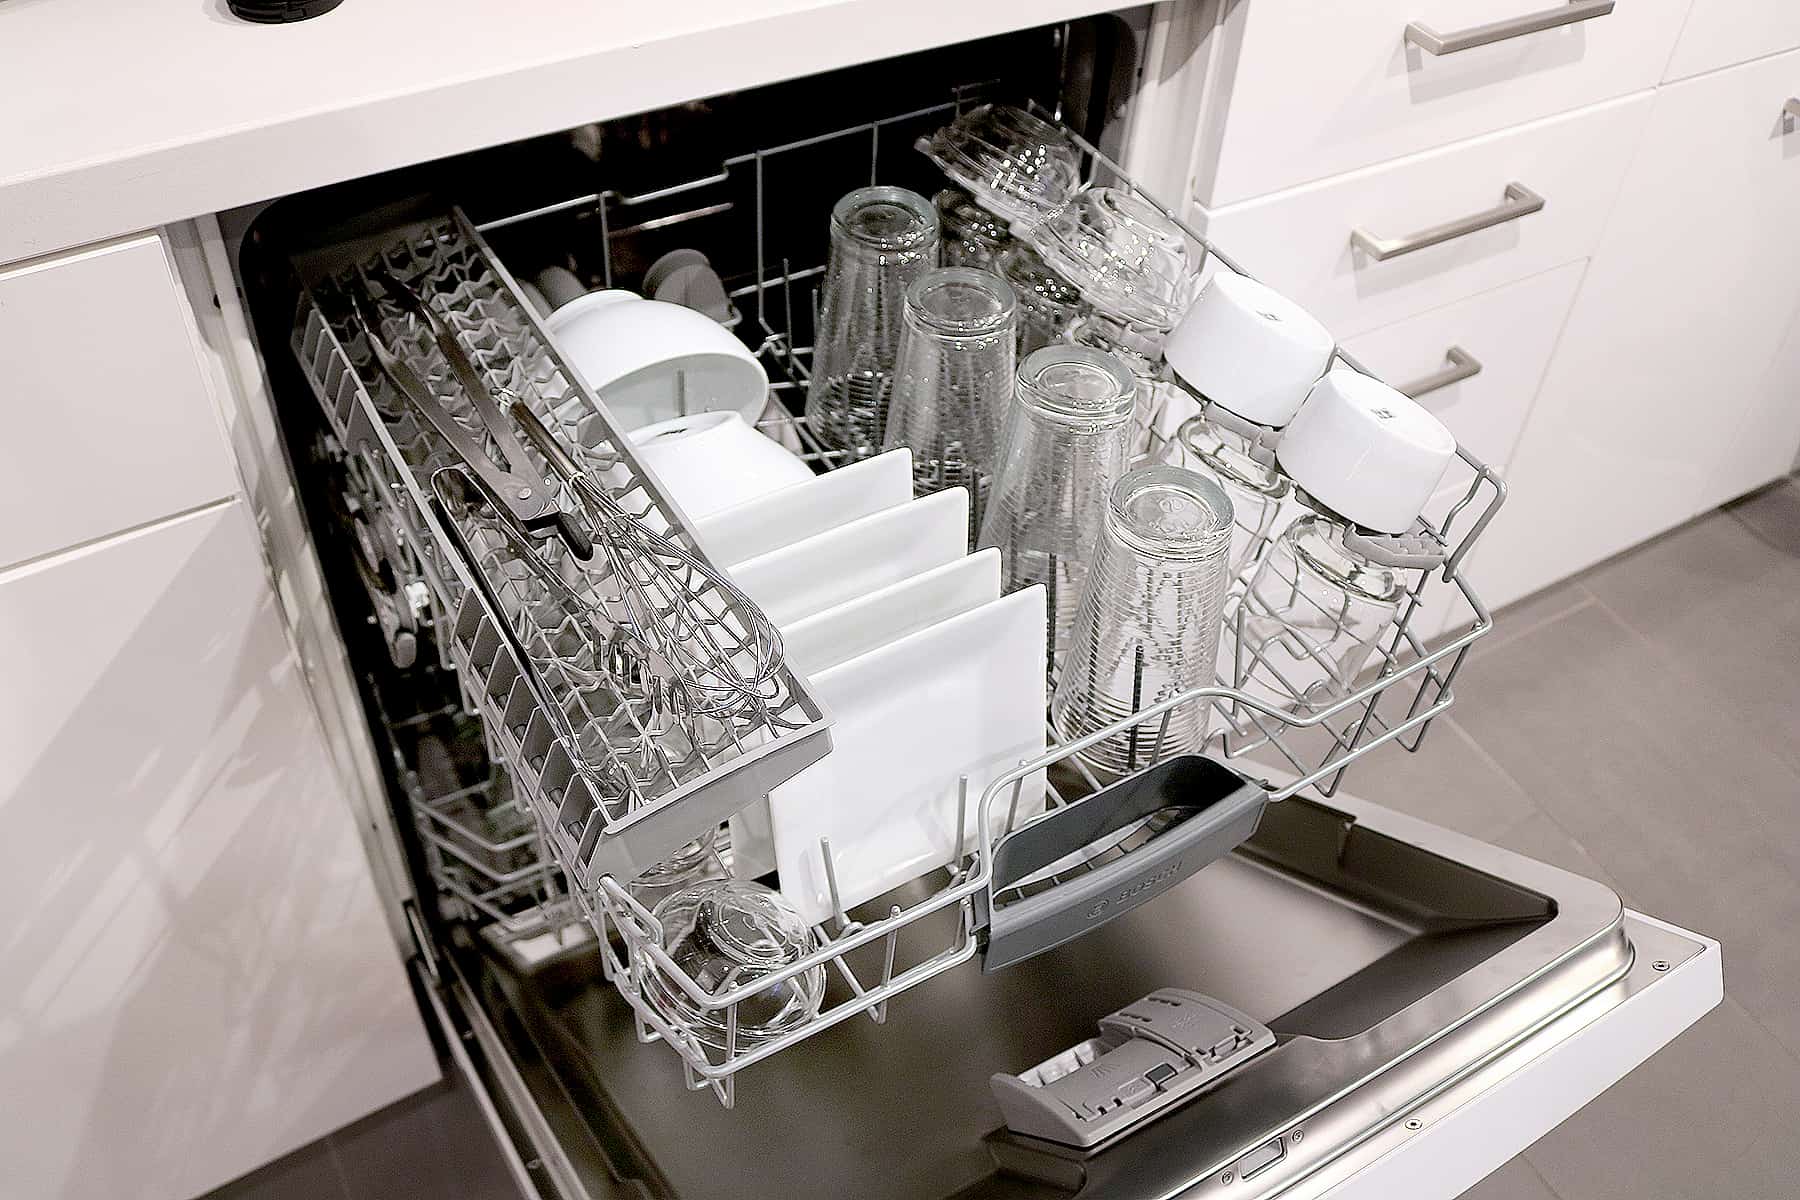 Make Dishwashing Easy with the Bosch 100 Series at Best Buy